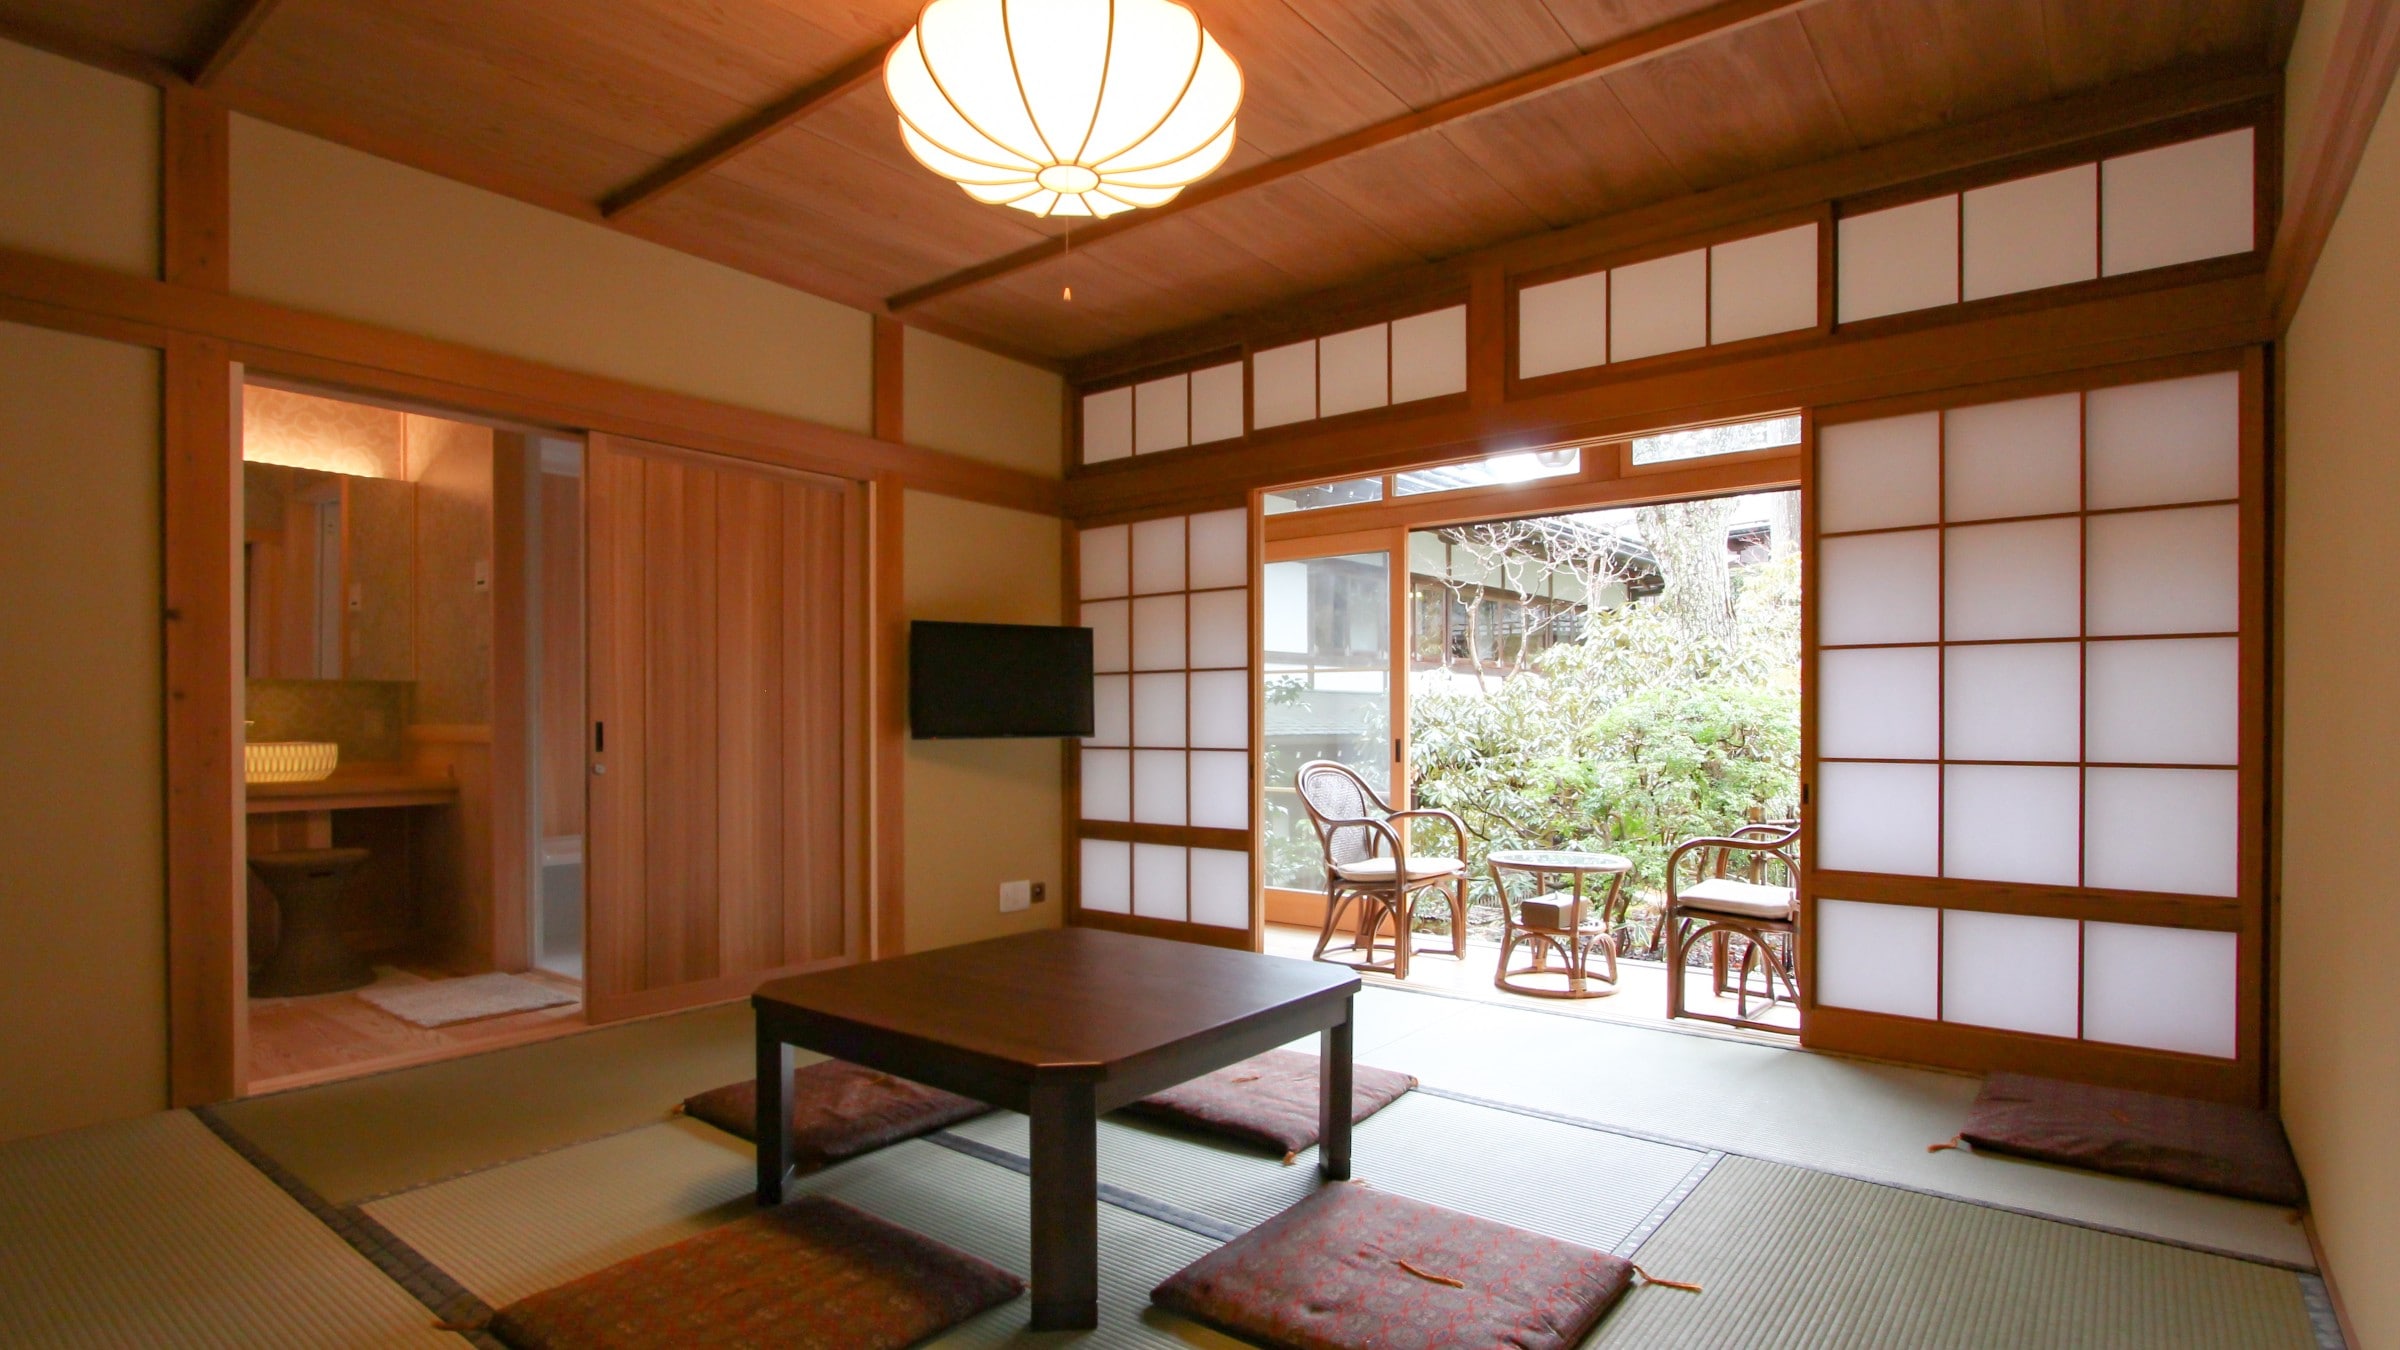 An example of an advanced Japanese-style room (with bath and toilet)